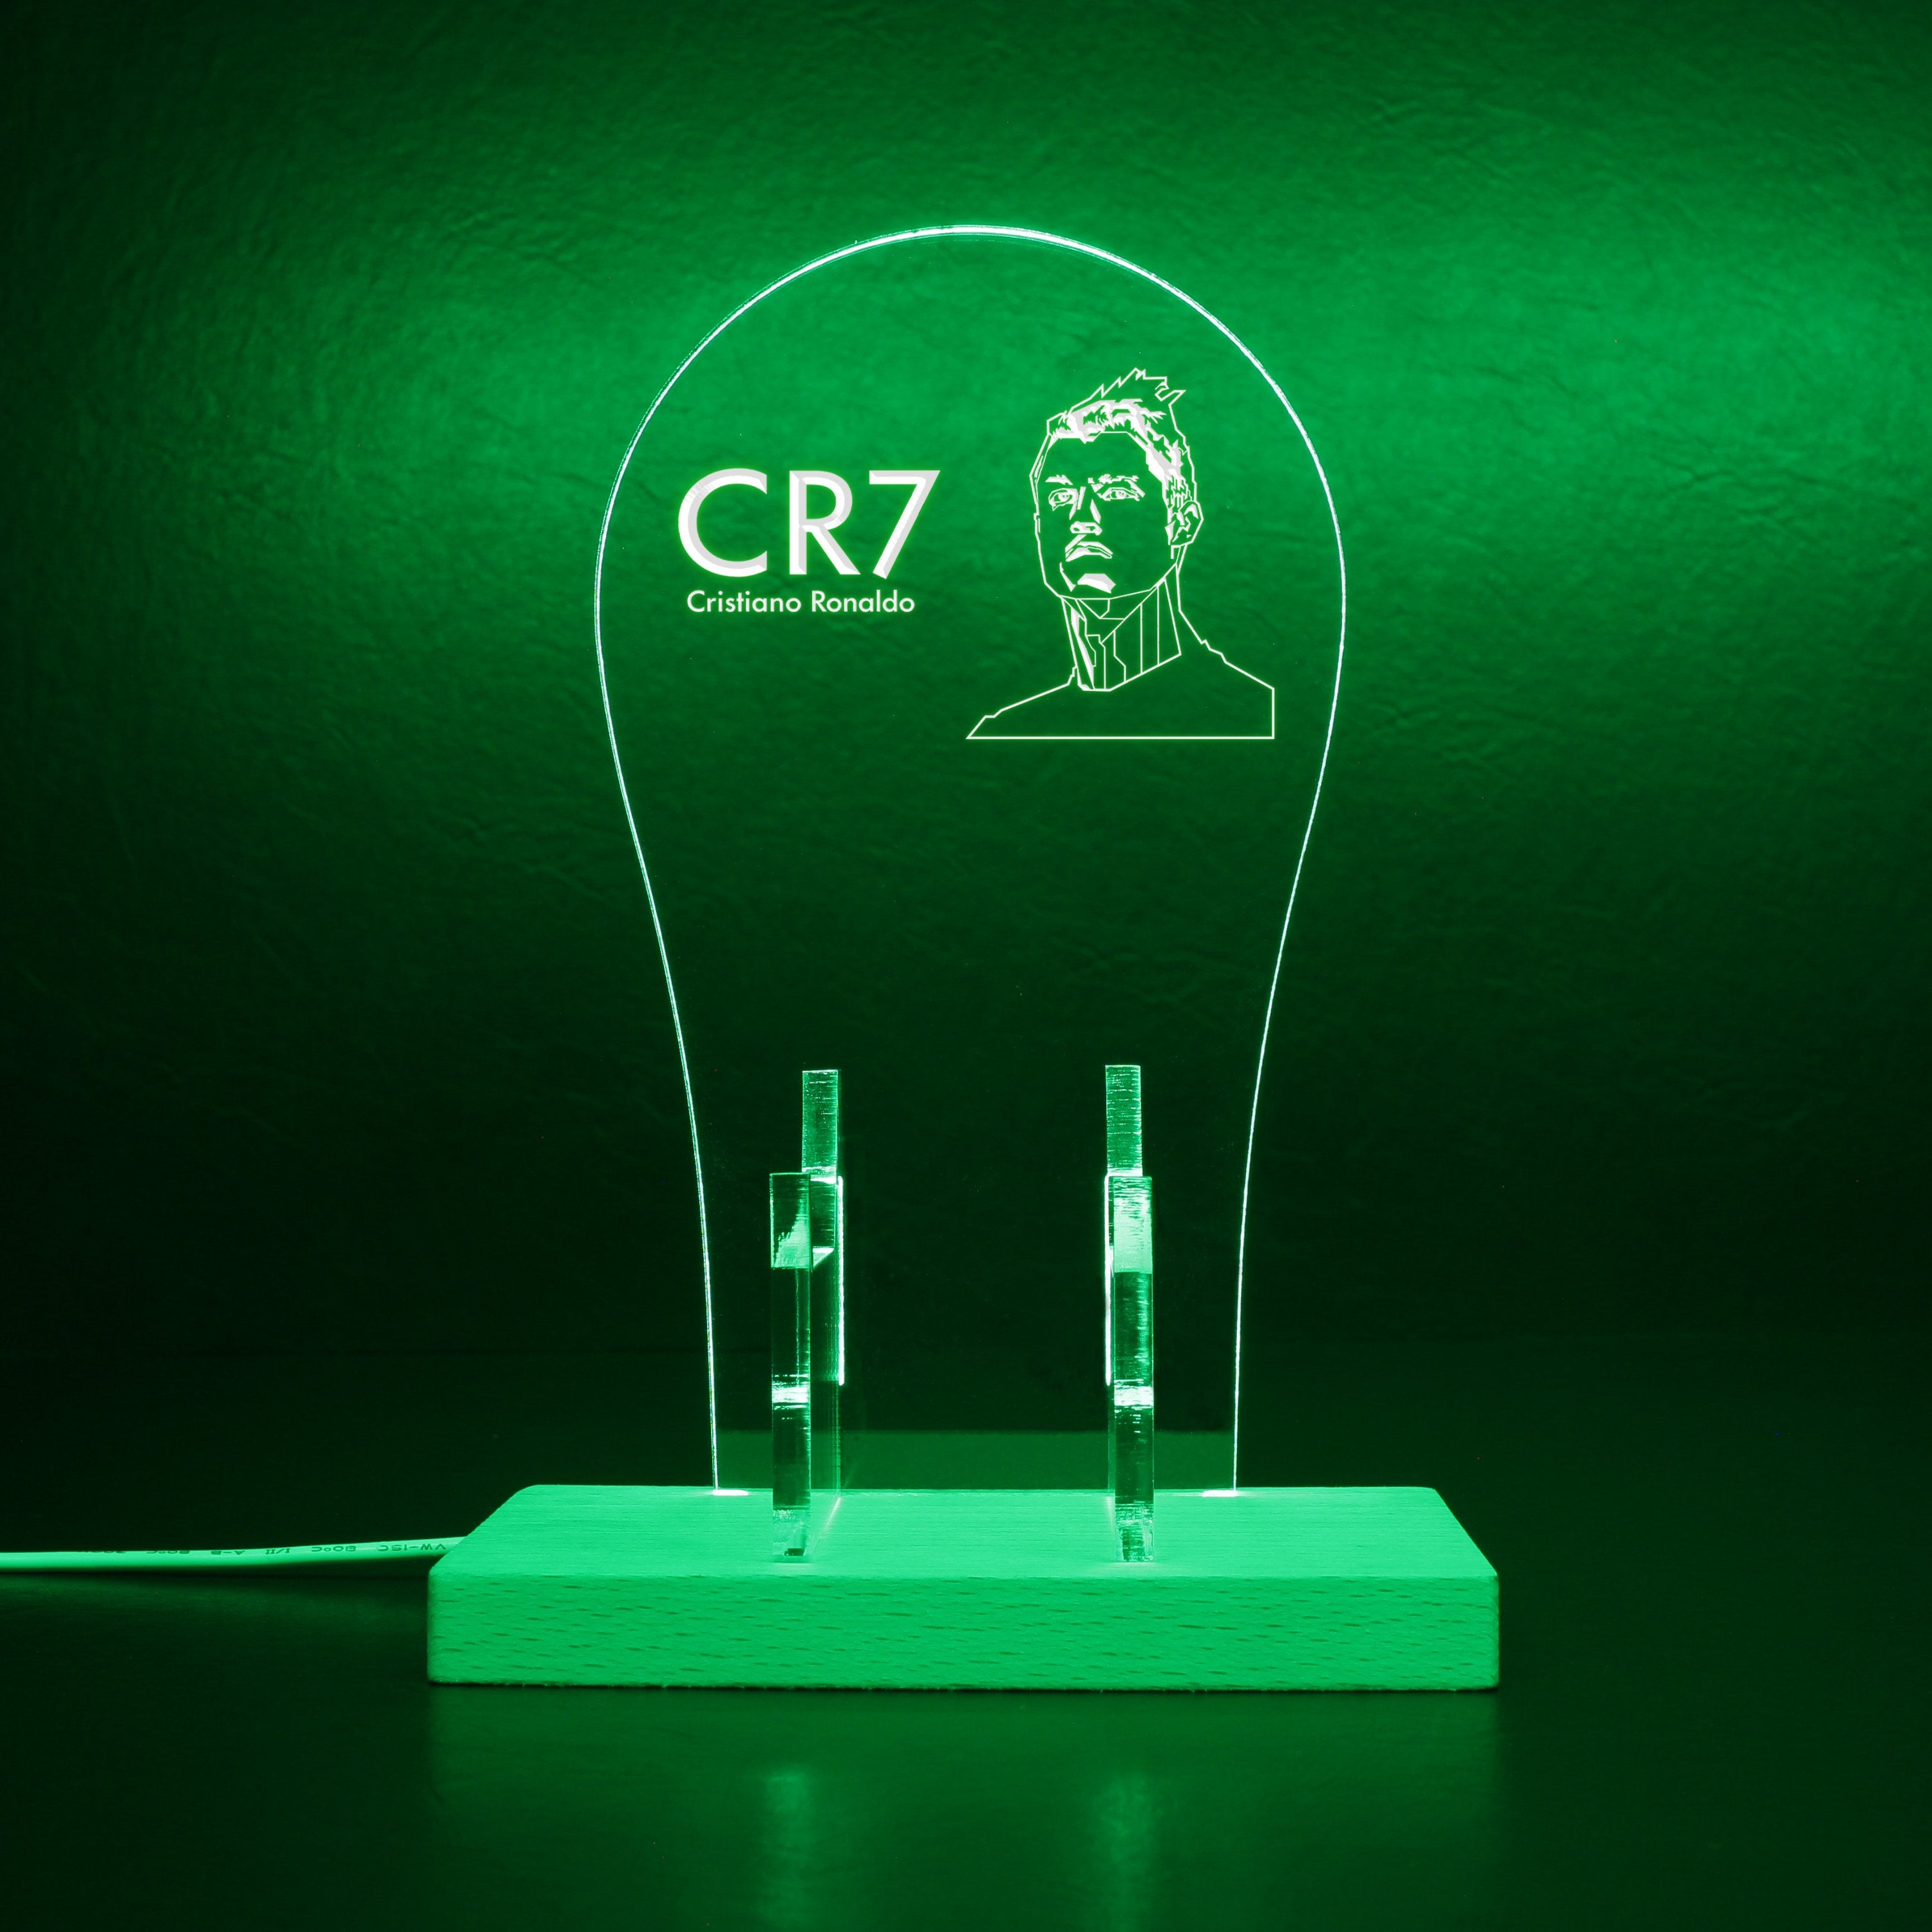 Cristiano-Ronaldo-Cr7 RGB LED Gaming Headset Controller Stand